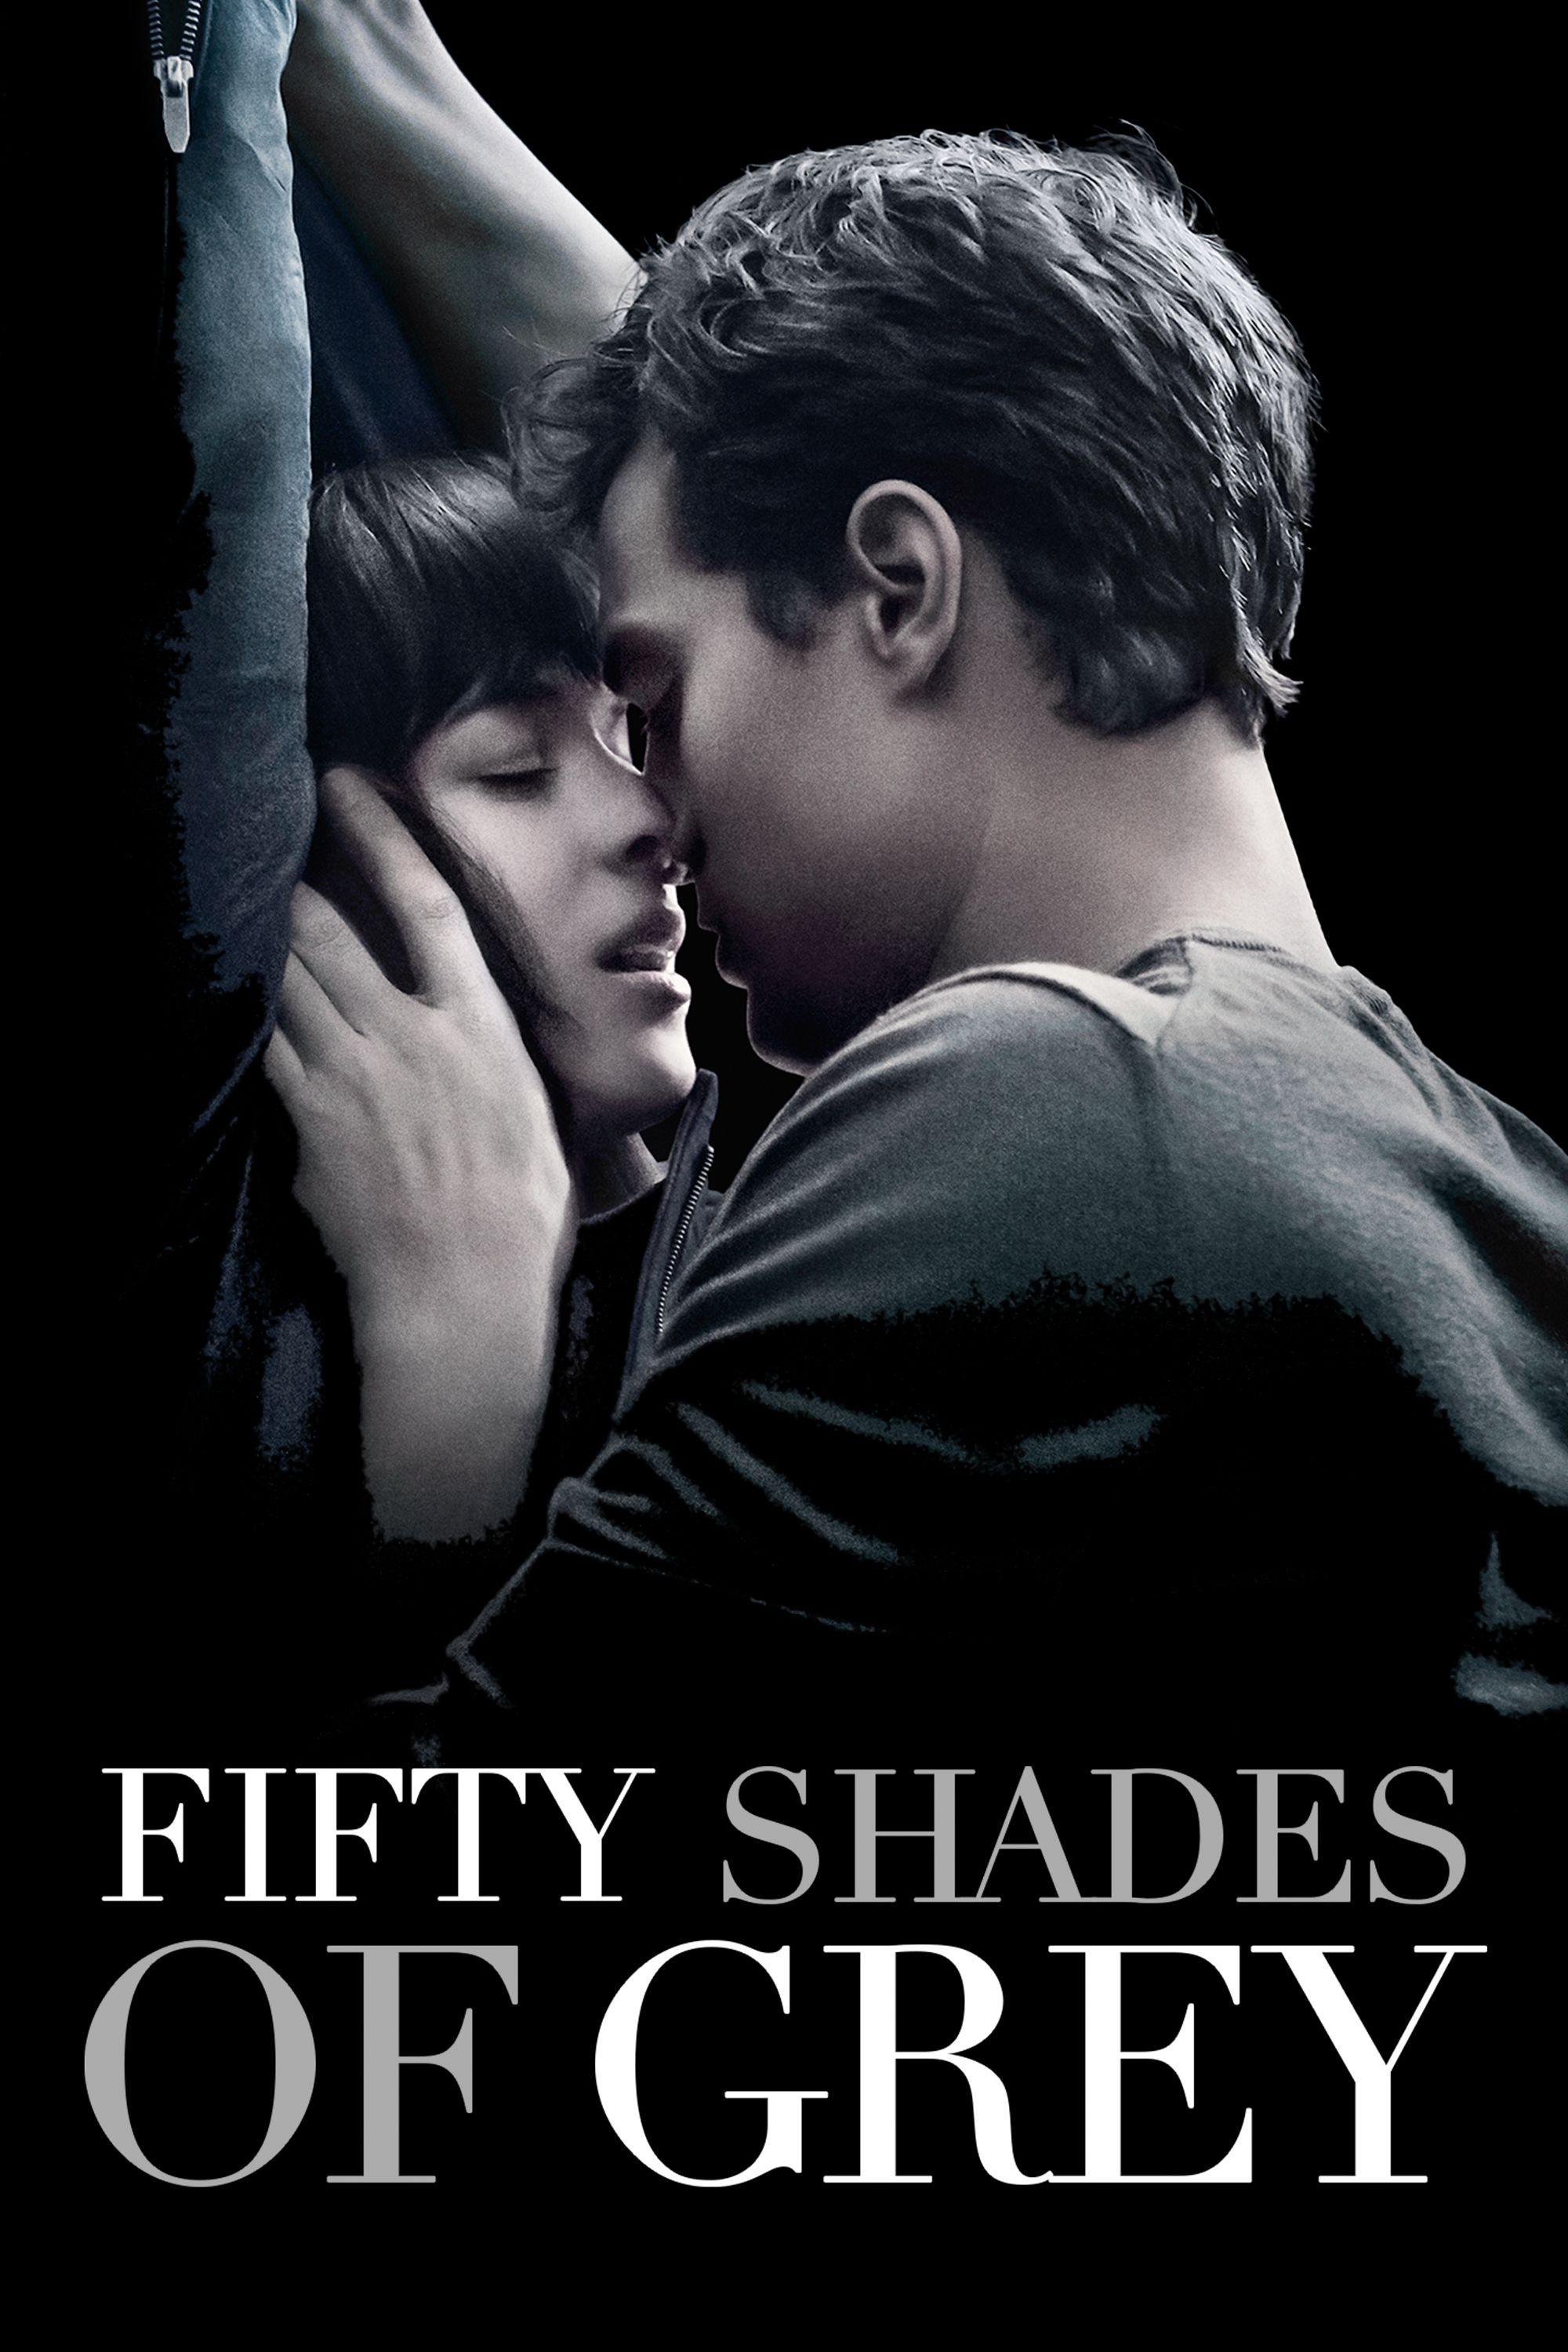 Best of 50 shades of gray online free